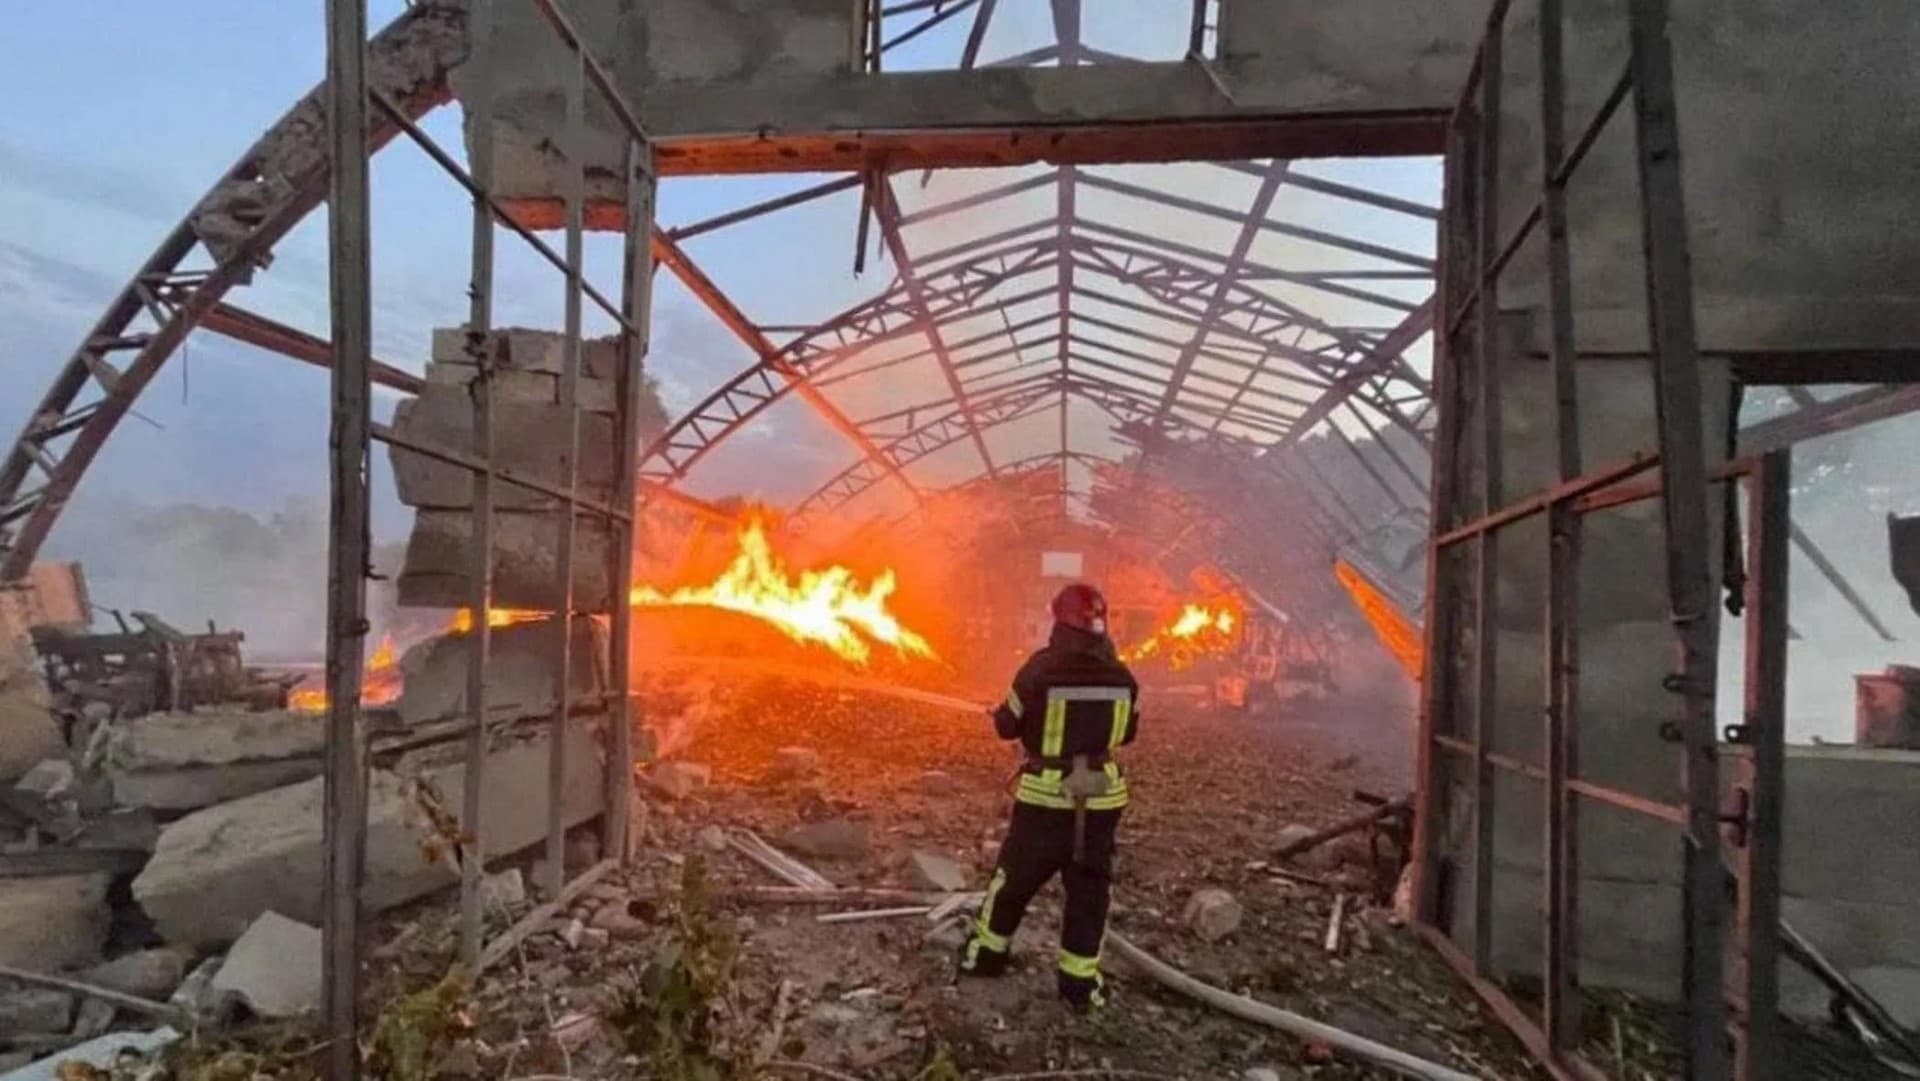 A firefighter works at a site that was hit amid Russian drone attacks in Ukraine's Odesa region